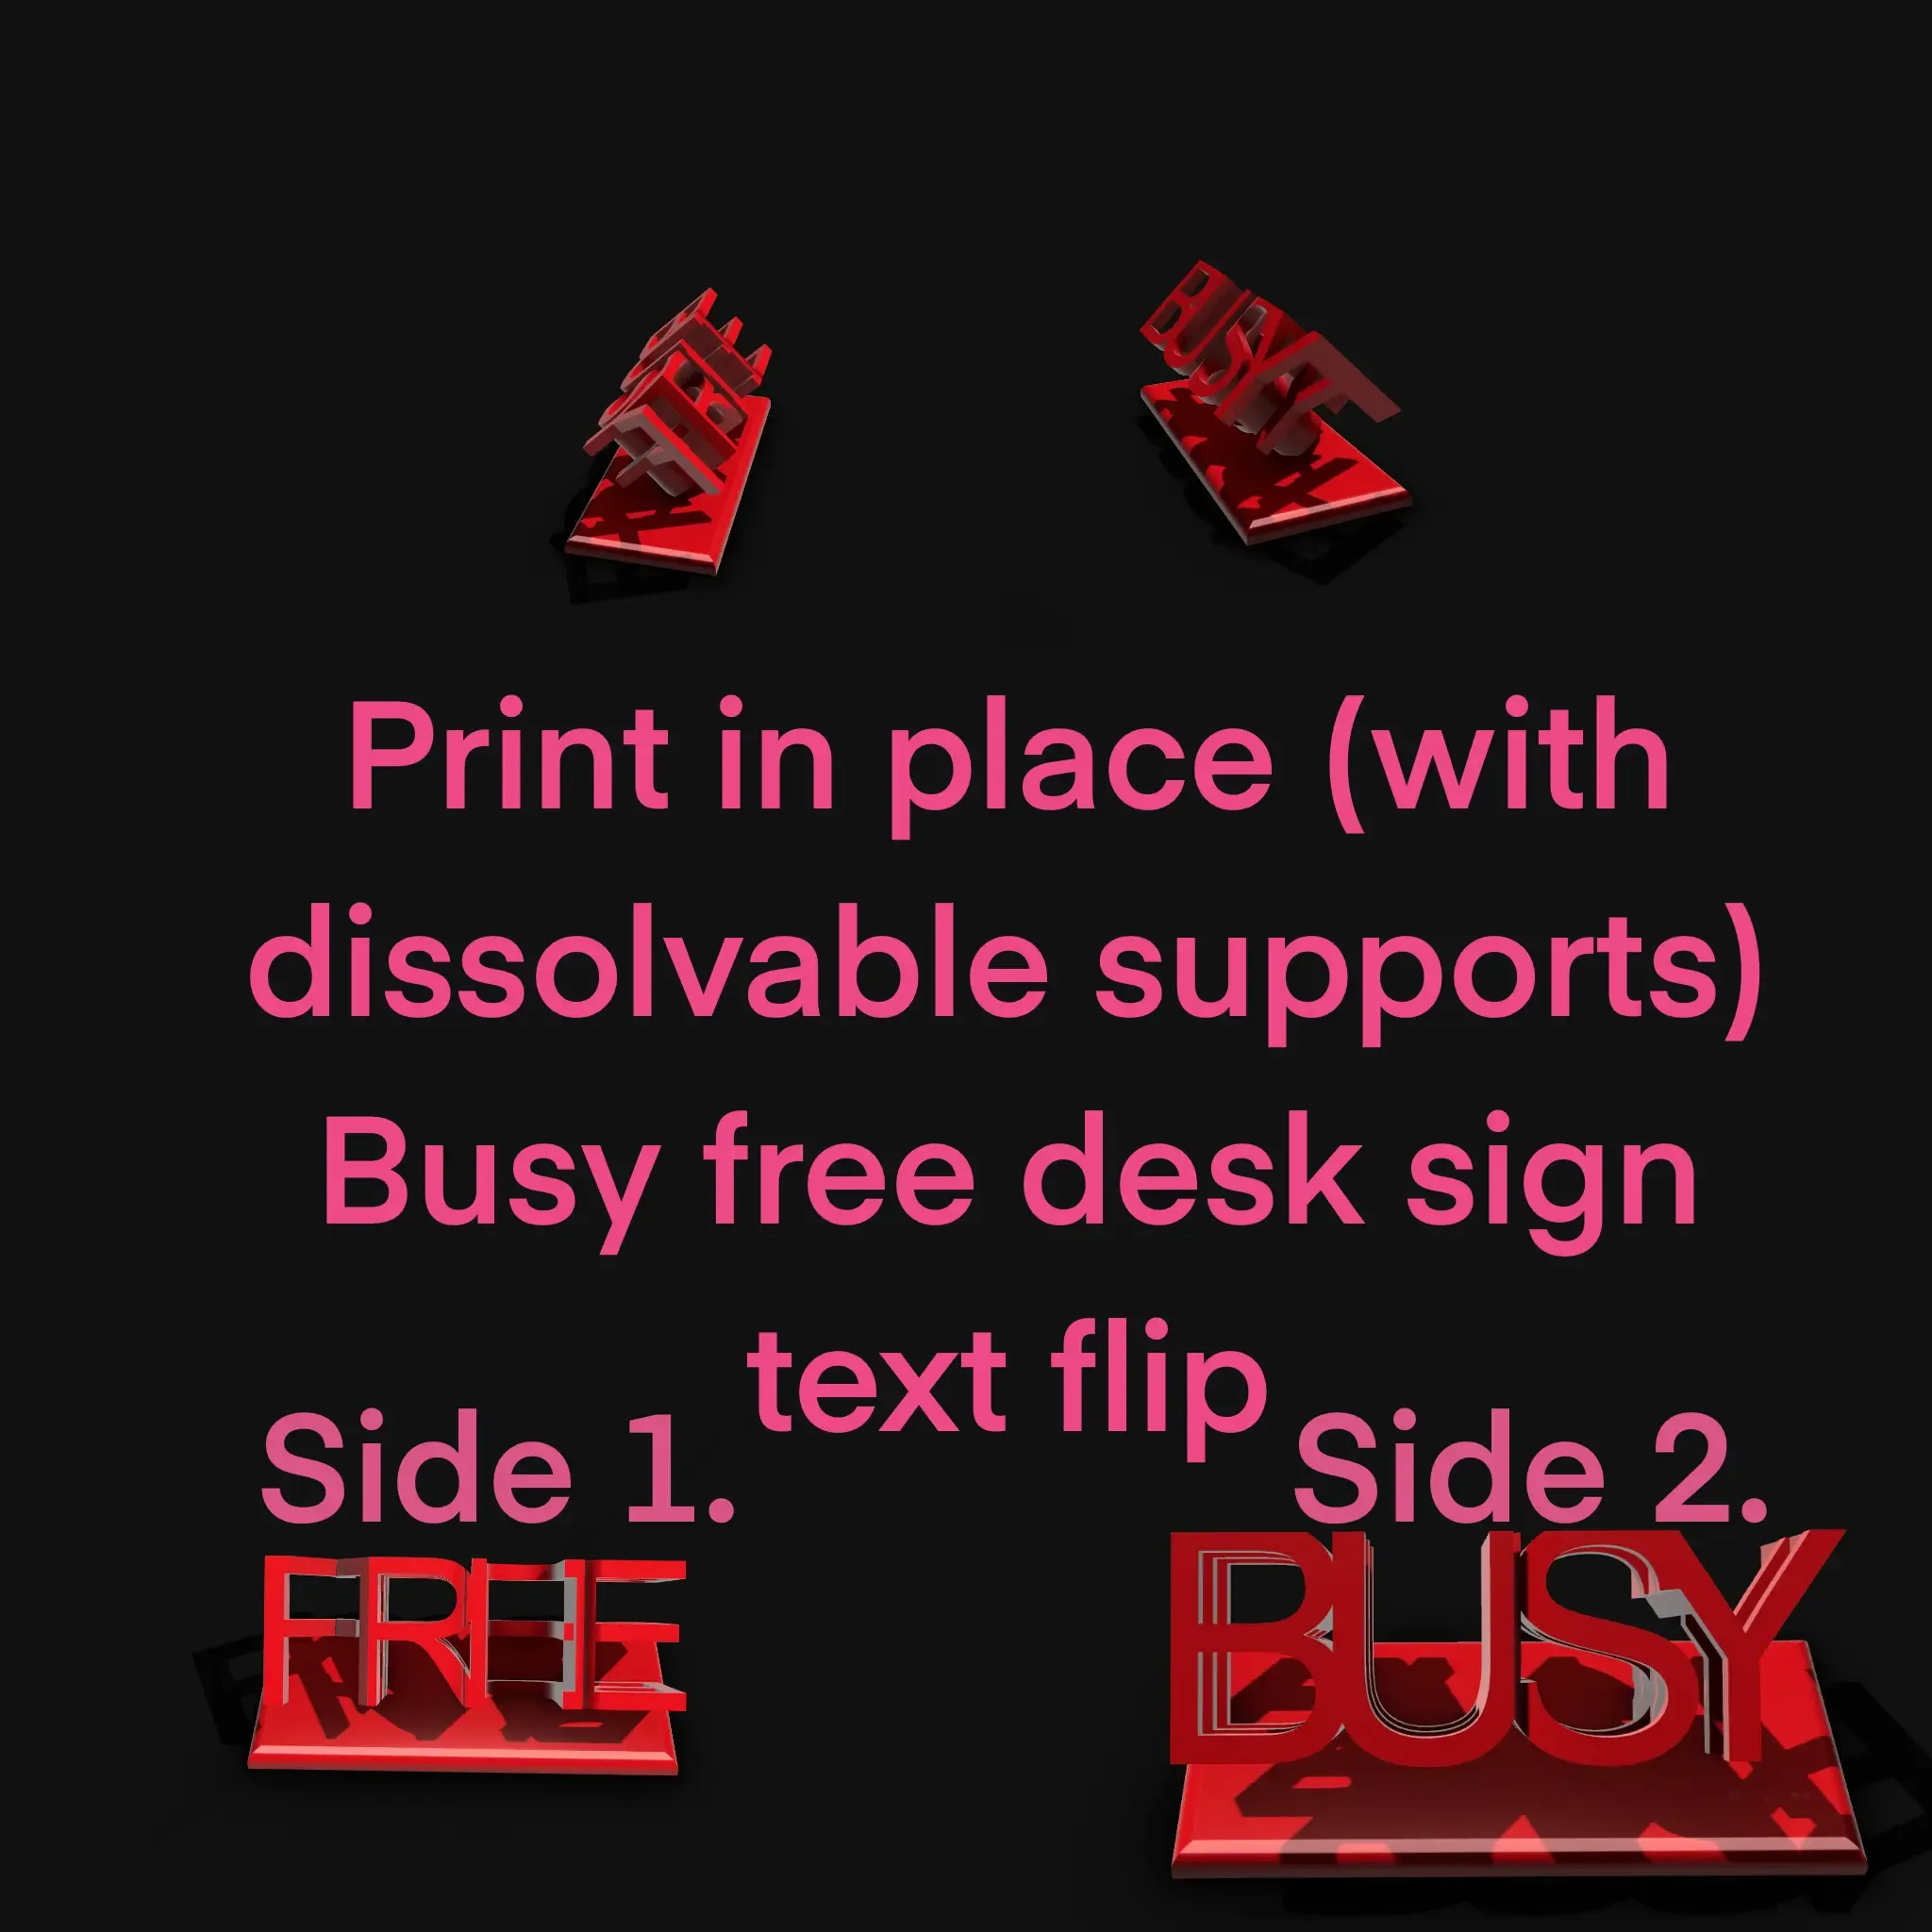 BUSY FREE SIGN (Dissolvable supports)